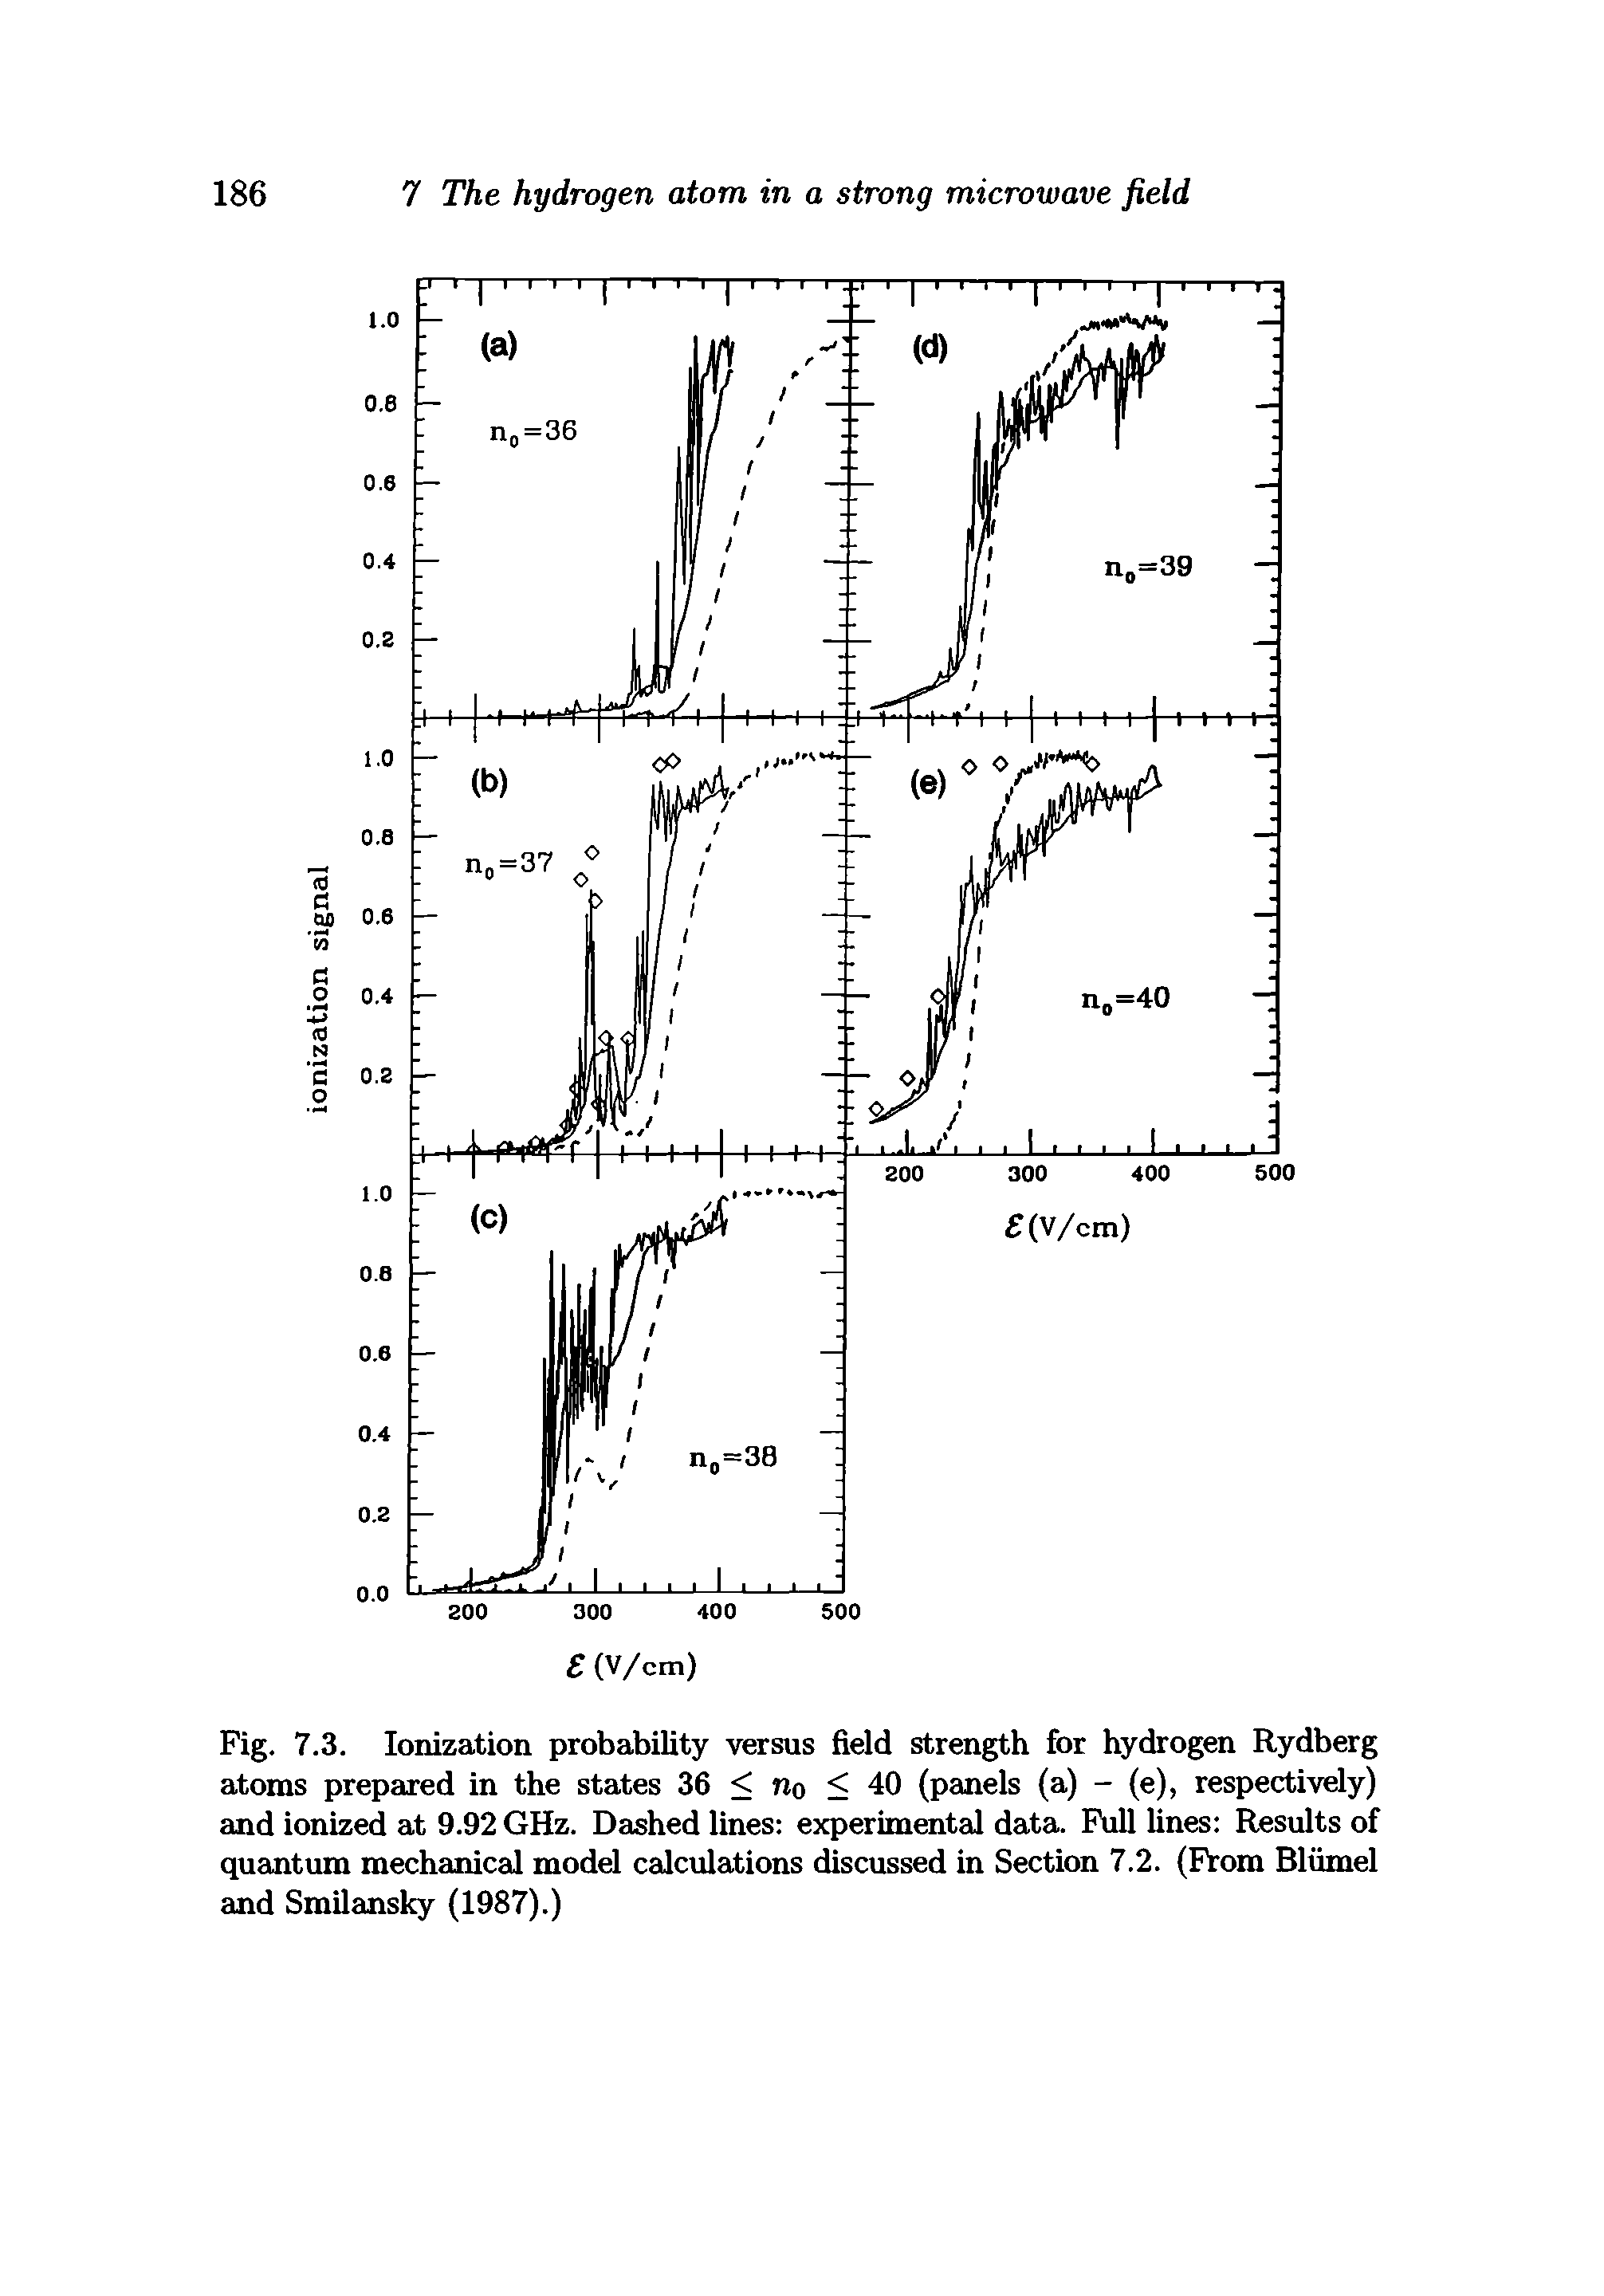 Fig. 7.3. Ionization probability versus field strength for hydrogen Rydberg atoms prepared in the states 36 < no < 40 (panels (a) - (e), respectively) and ionized at 9.92 GHz. Dashed lines experimental data. Full lines Results of quantum mechanical model calculations discussed in Section 7.2. (From Bliimel and Smilansky (1987).)...